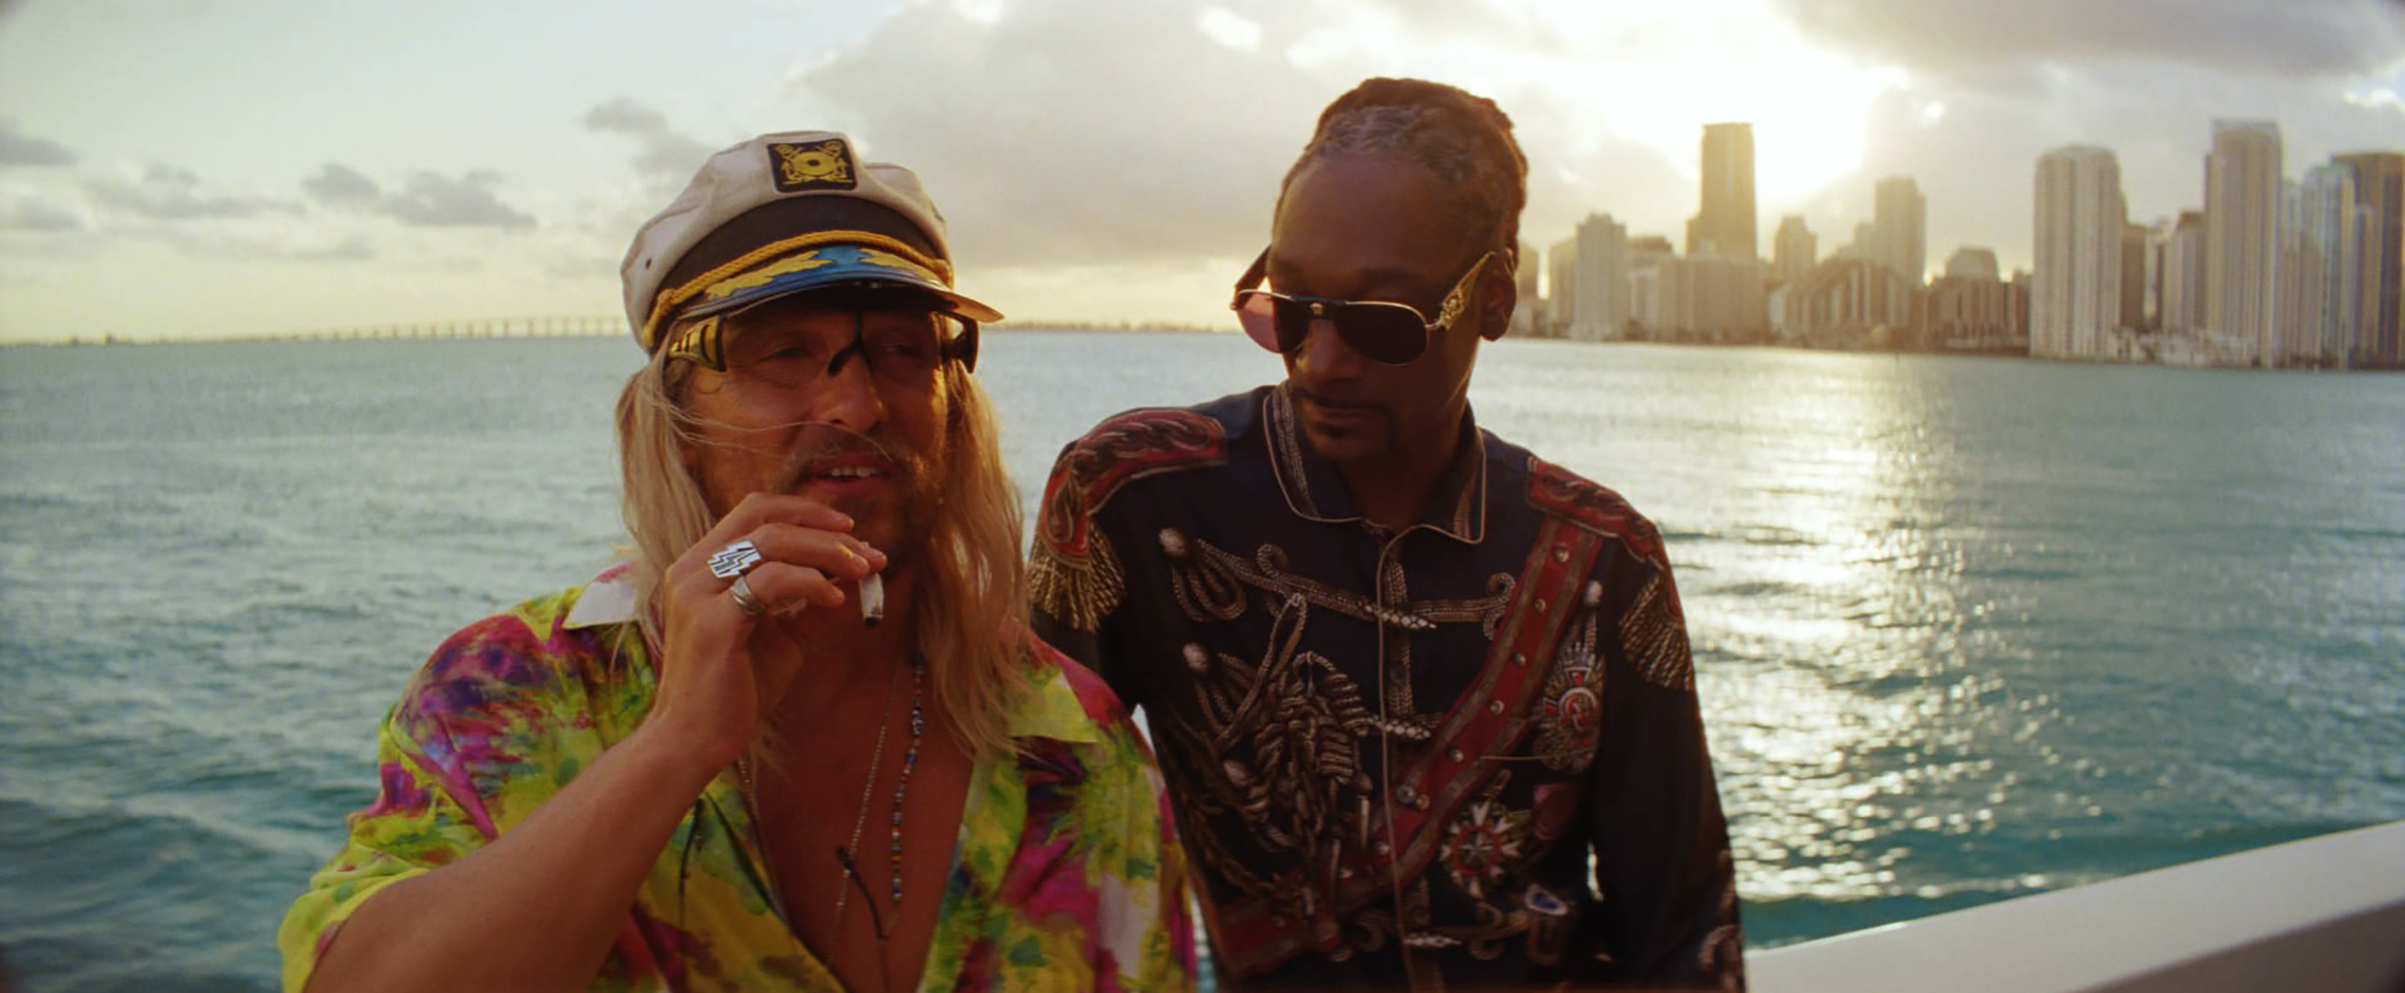 McConaughey mugs with rapper friend Lingerie, played by none other than Snoop Dogg (Neon)